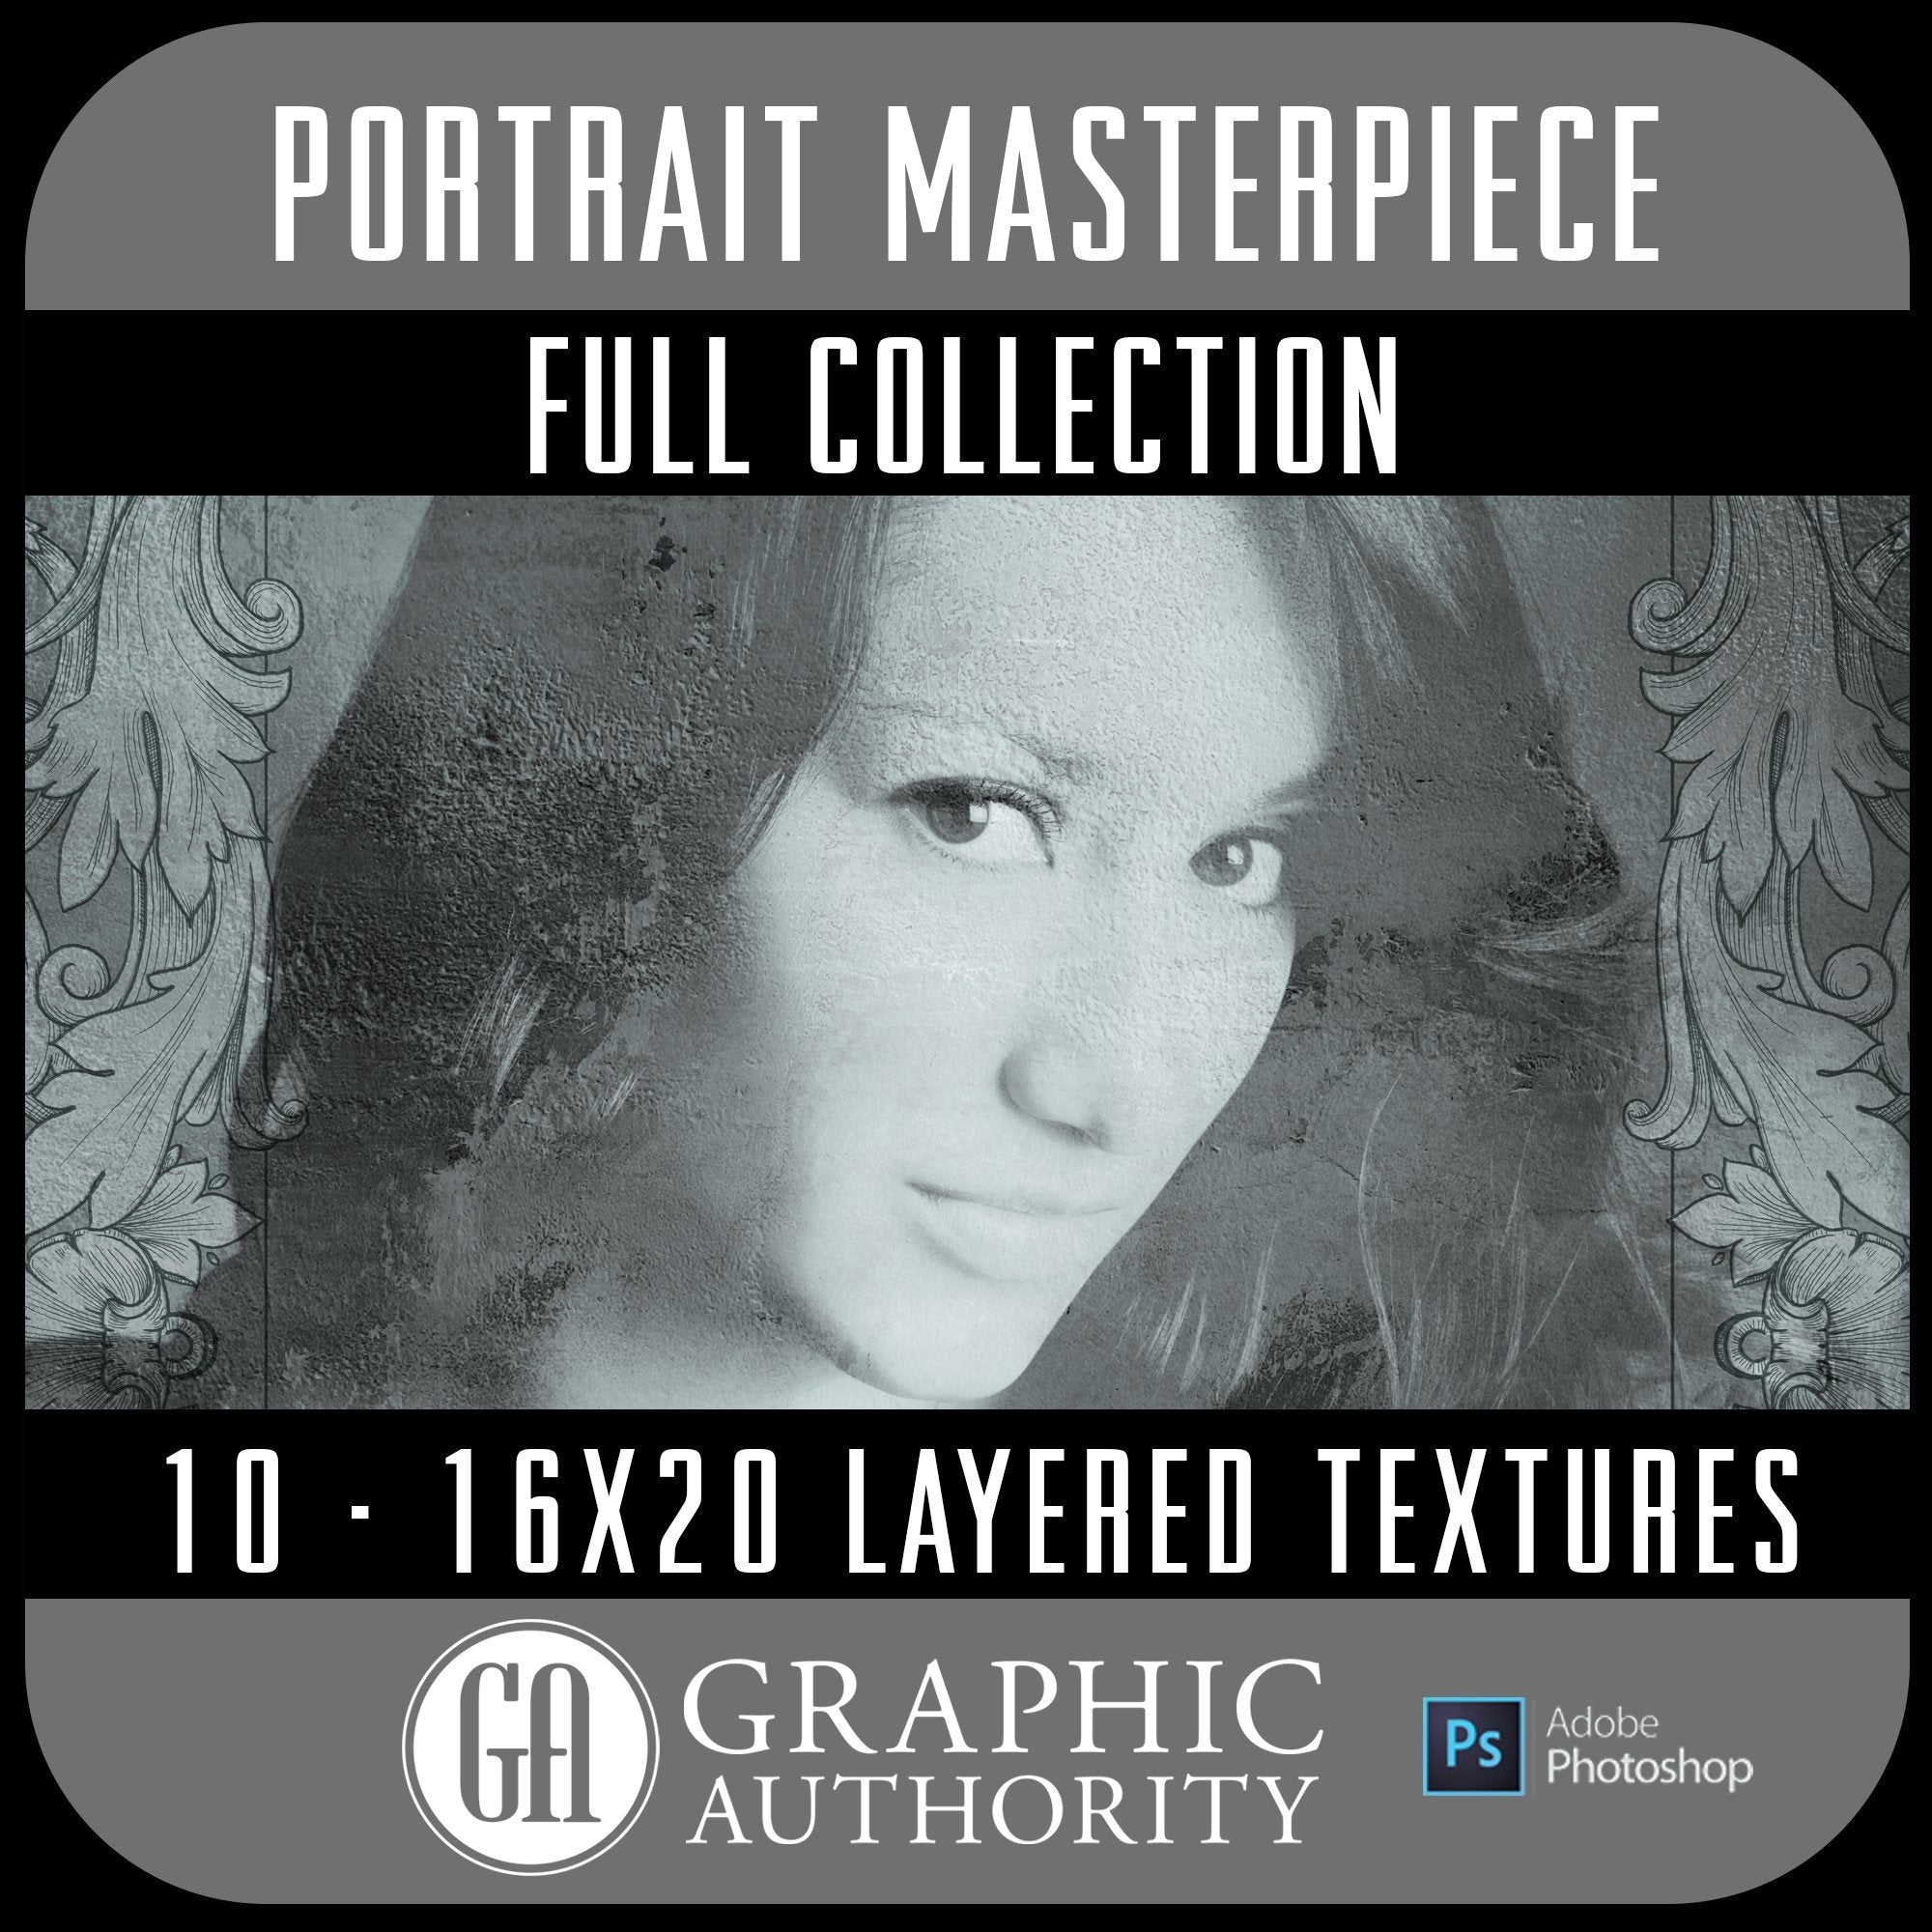 Portrait Masterpiece - Layered Textures - Full Collection-Photoshop Template - Graphic Authority